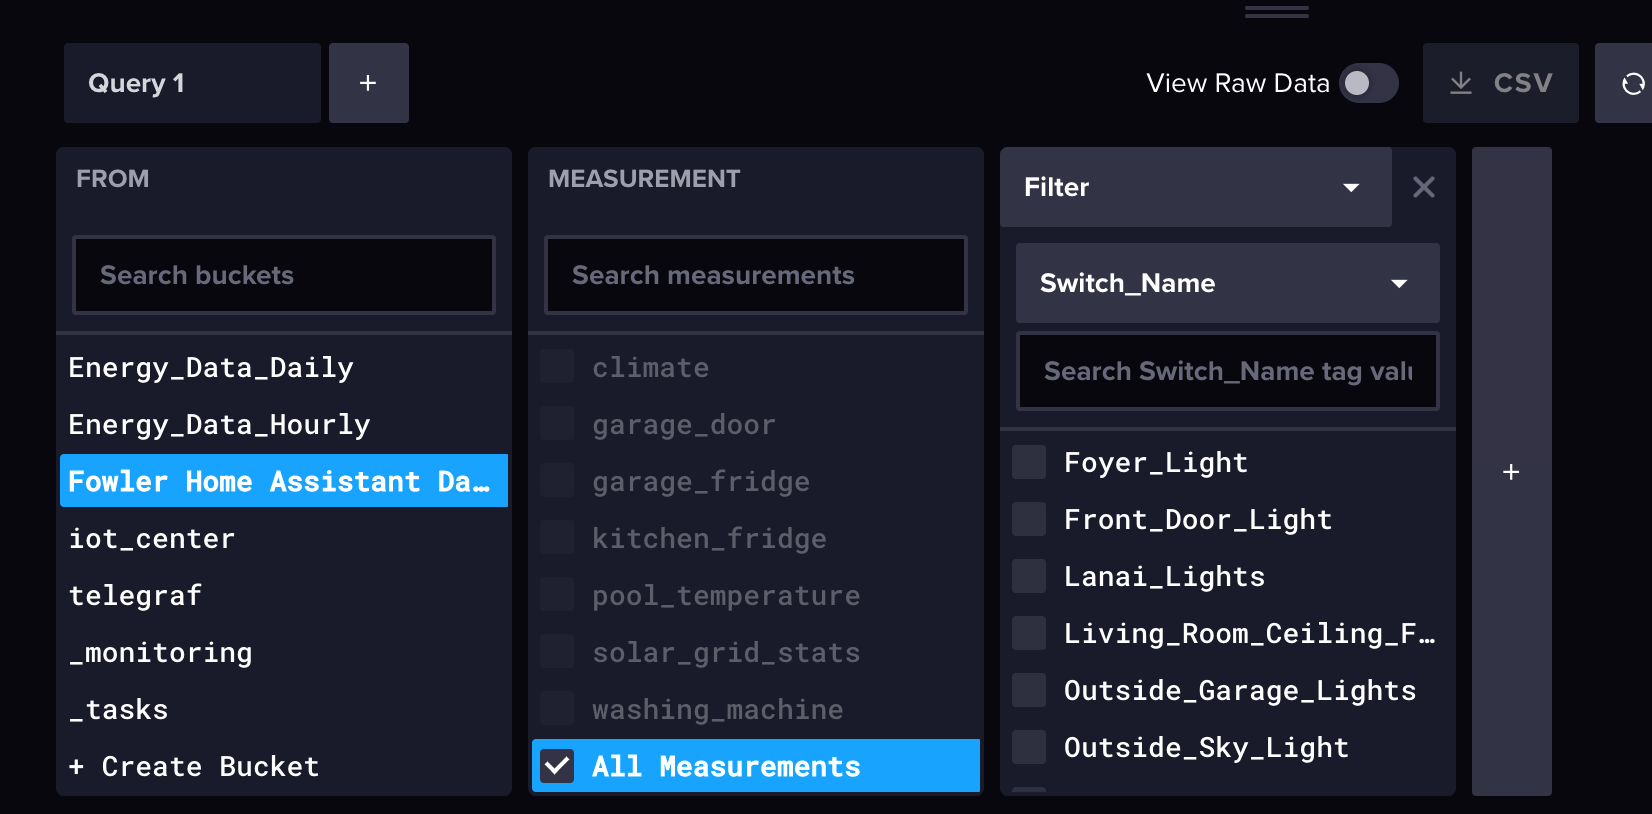 You can select more than one measurement